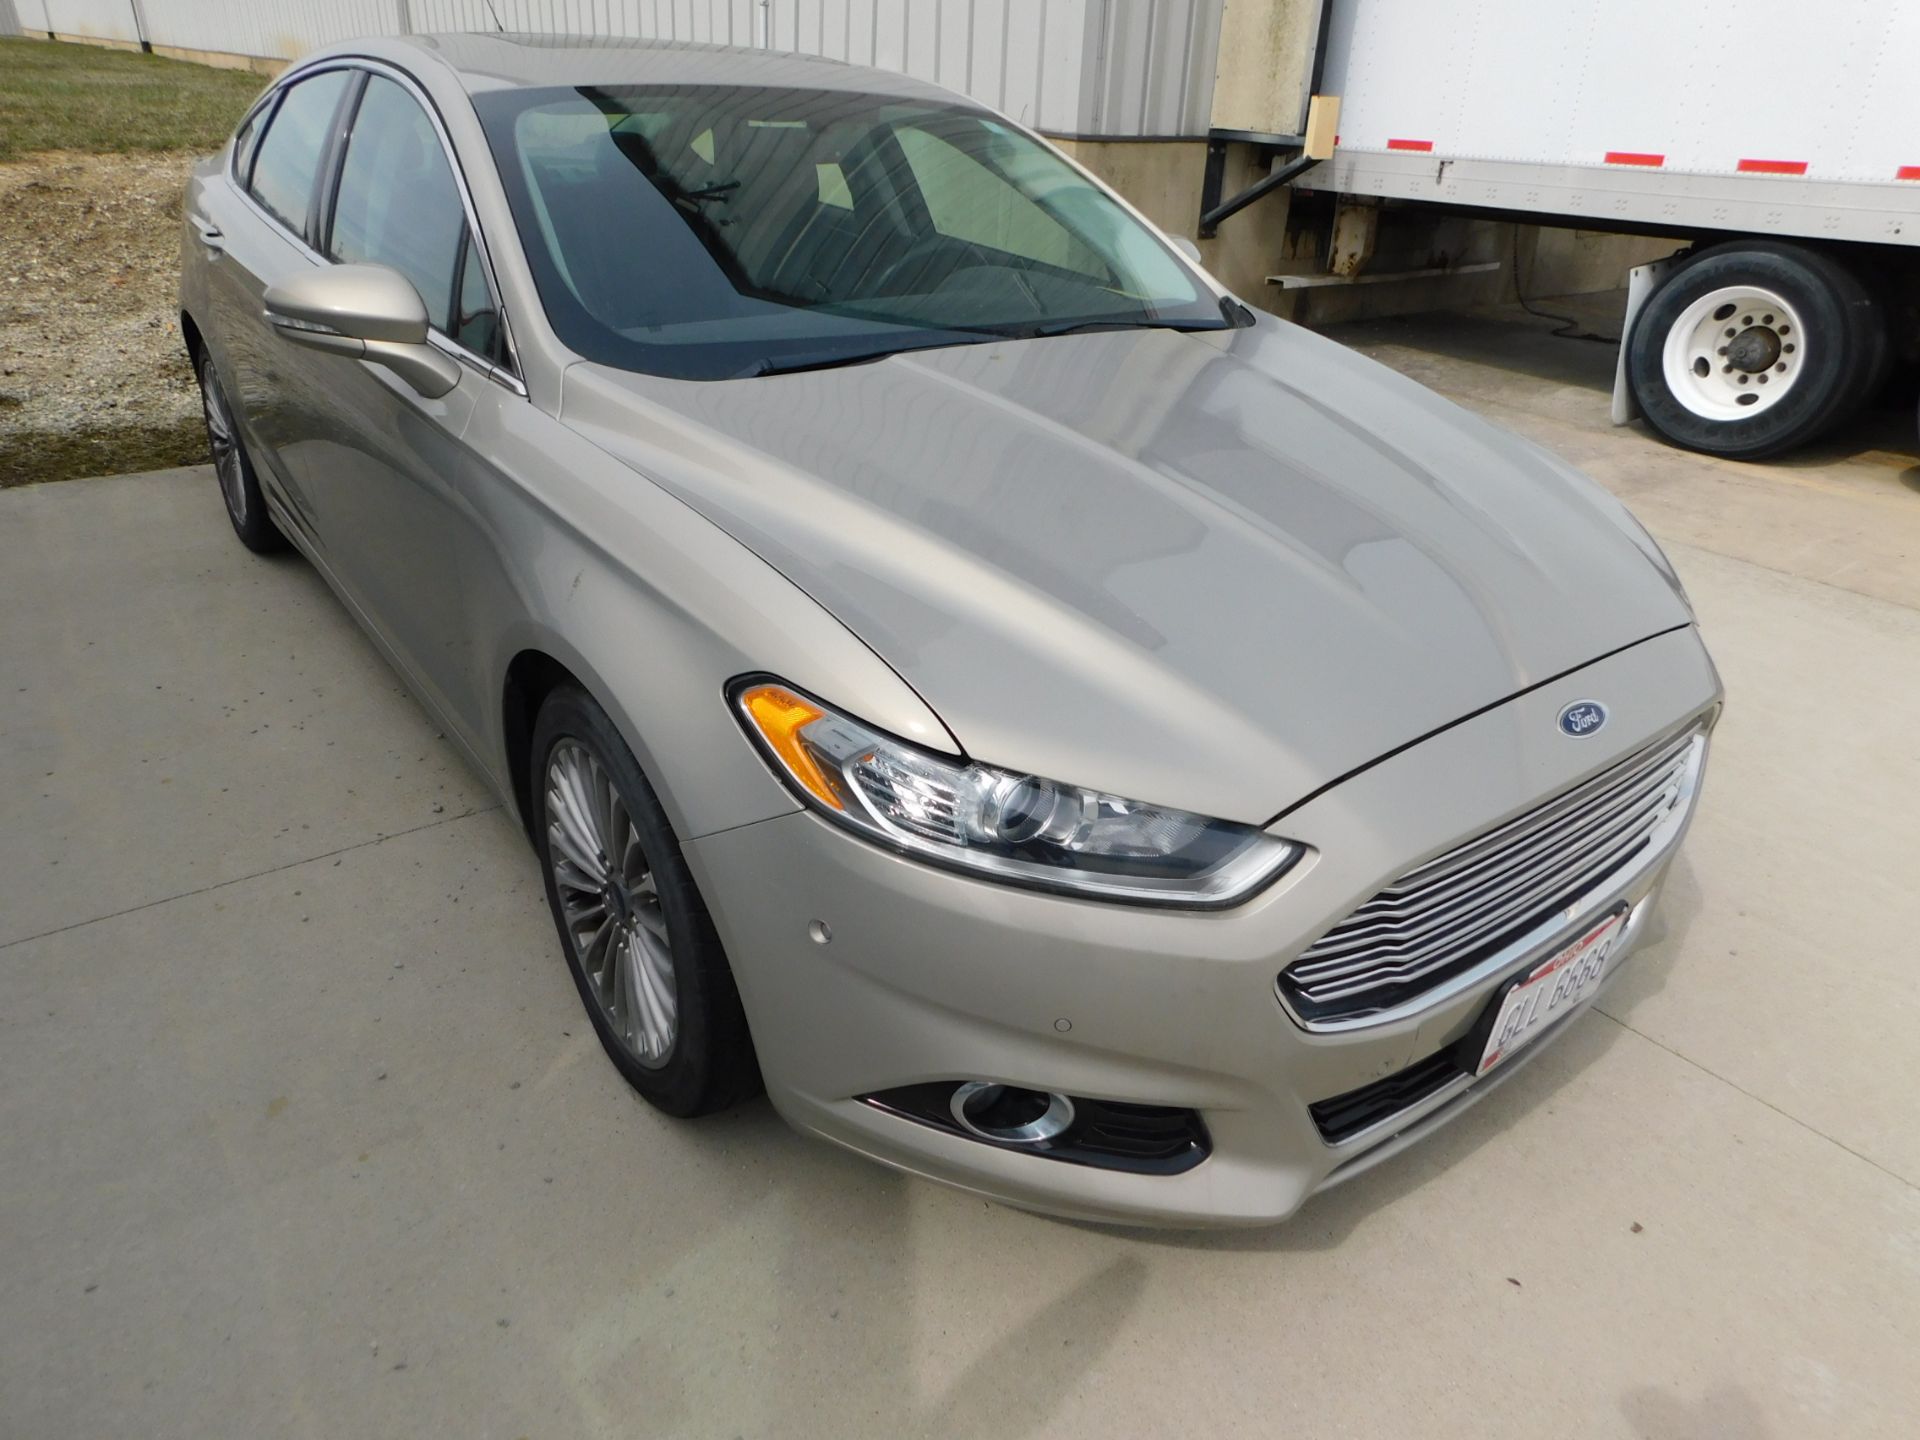 2015 Ford Fusion, Eco Boost AWD, Titanium Edition, VIN 3FA6P0D9XFR181007, Location 1 - 1100 Tower - Image 7 of 8